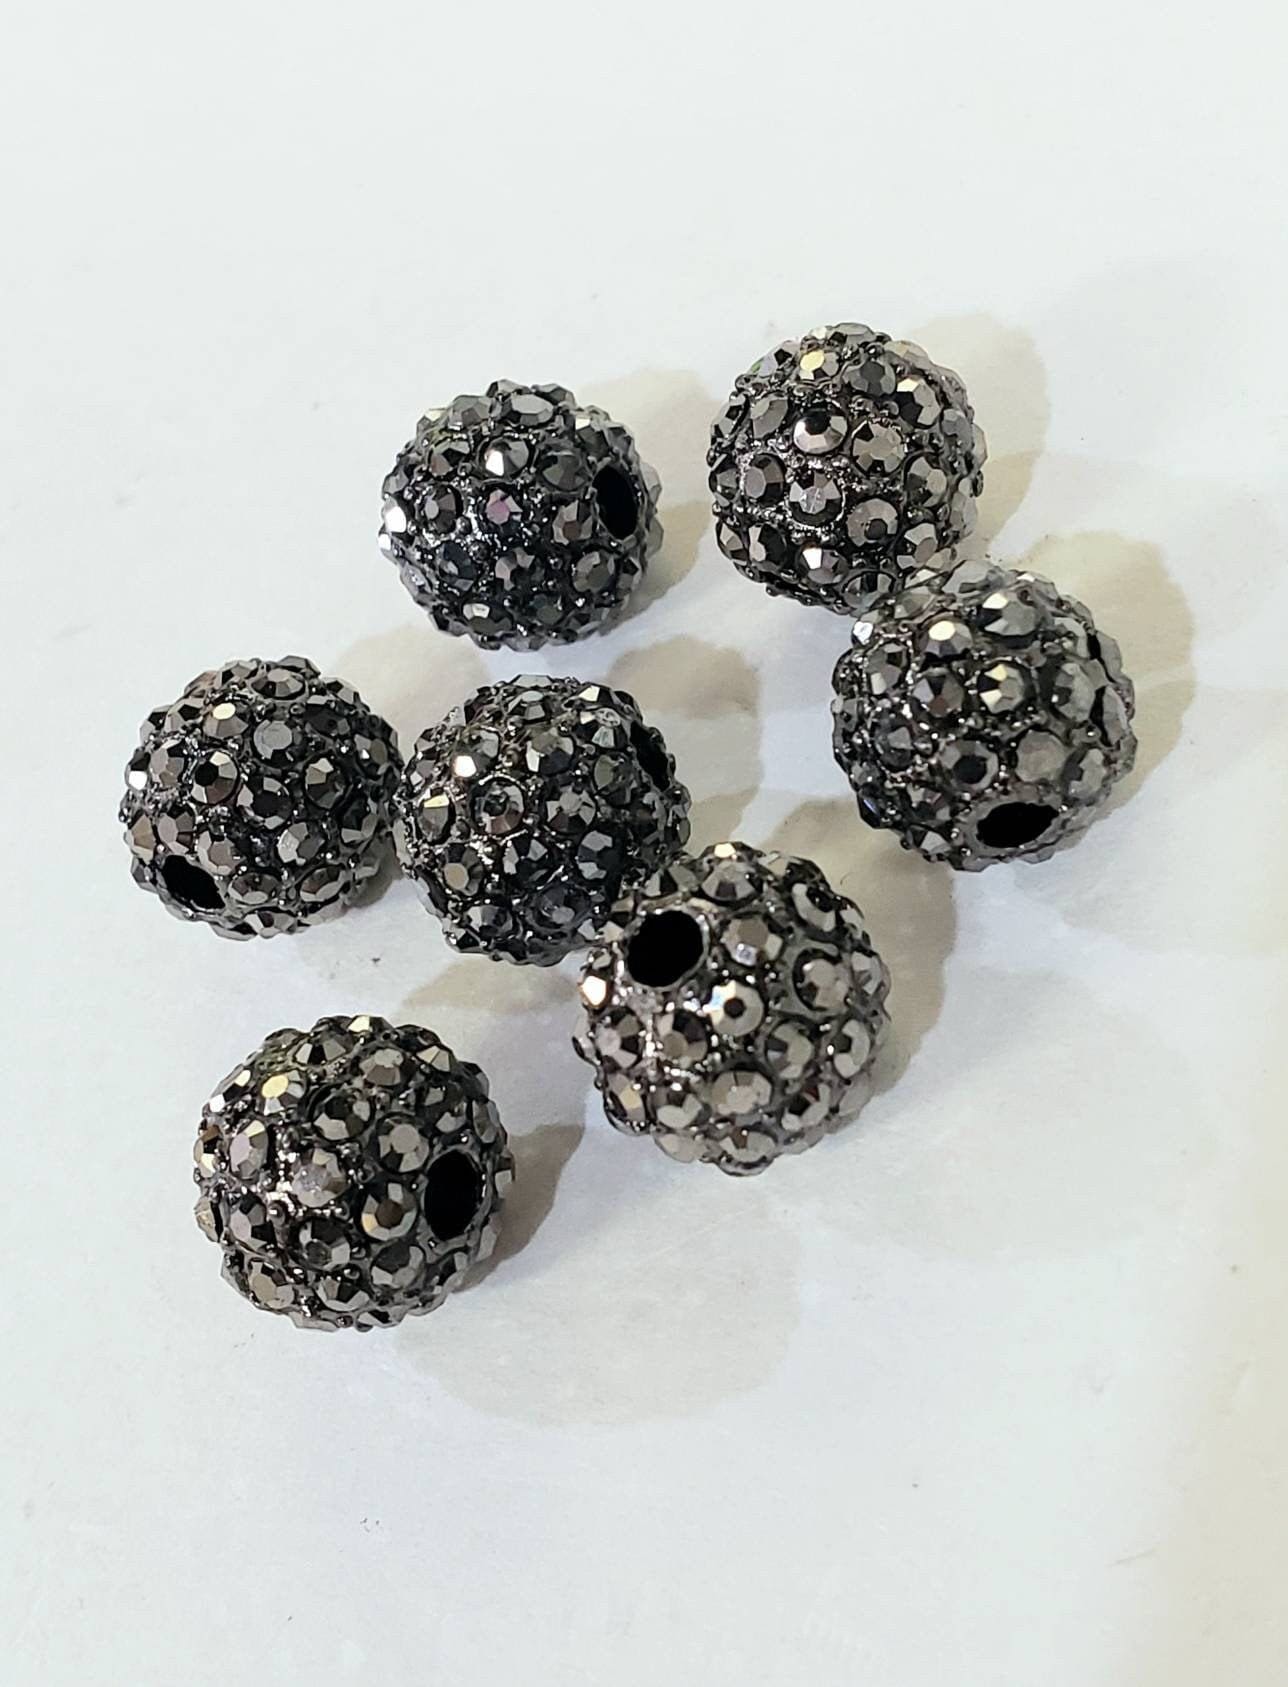 8,10,12mm Marcasite style black crystal ball, heavy weight, spacer bead for jewelry making.Great for bracelets spacer